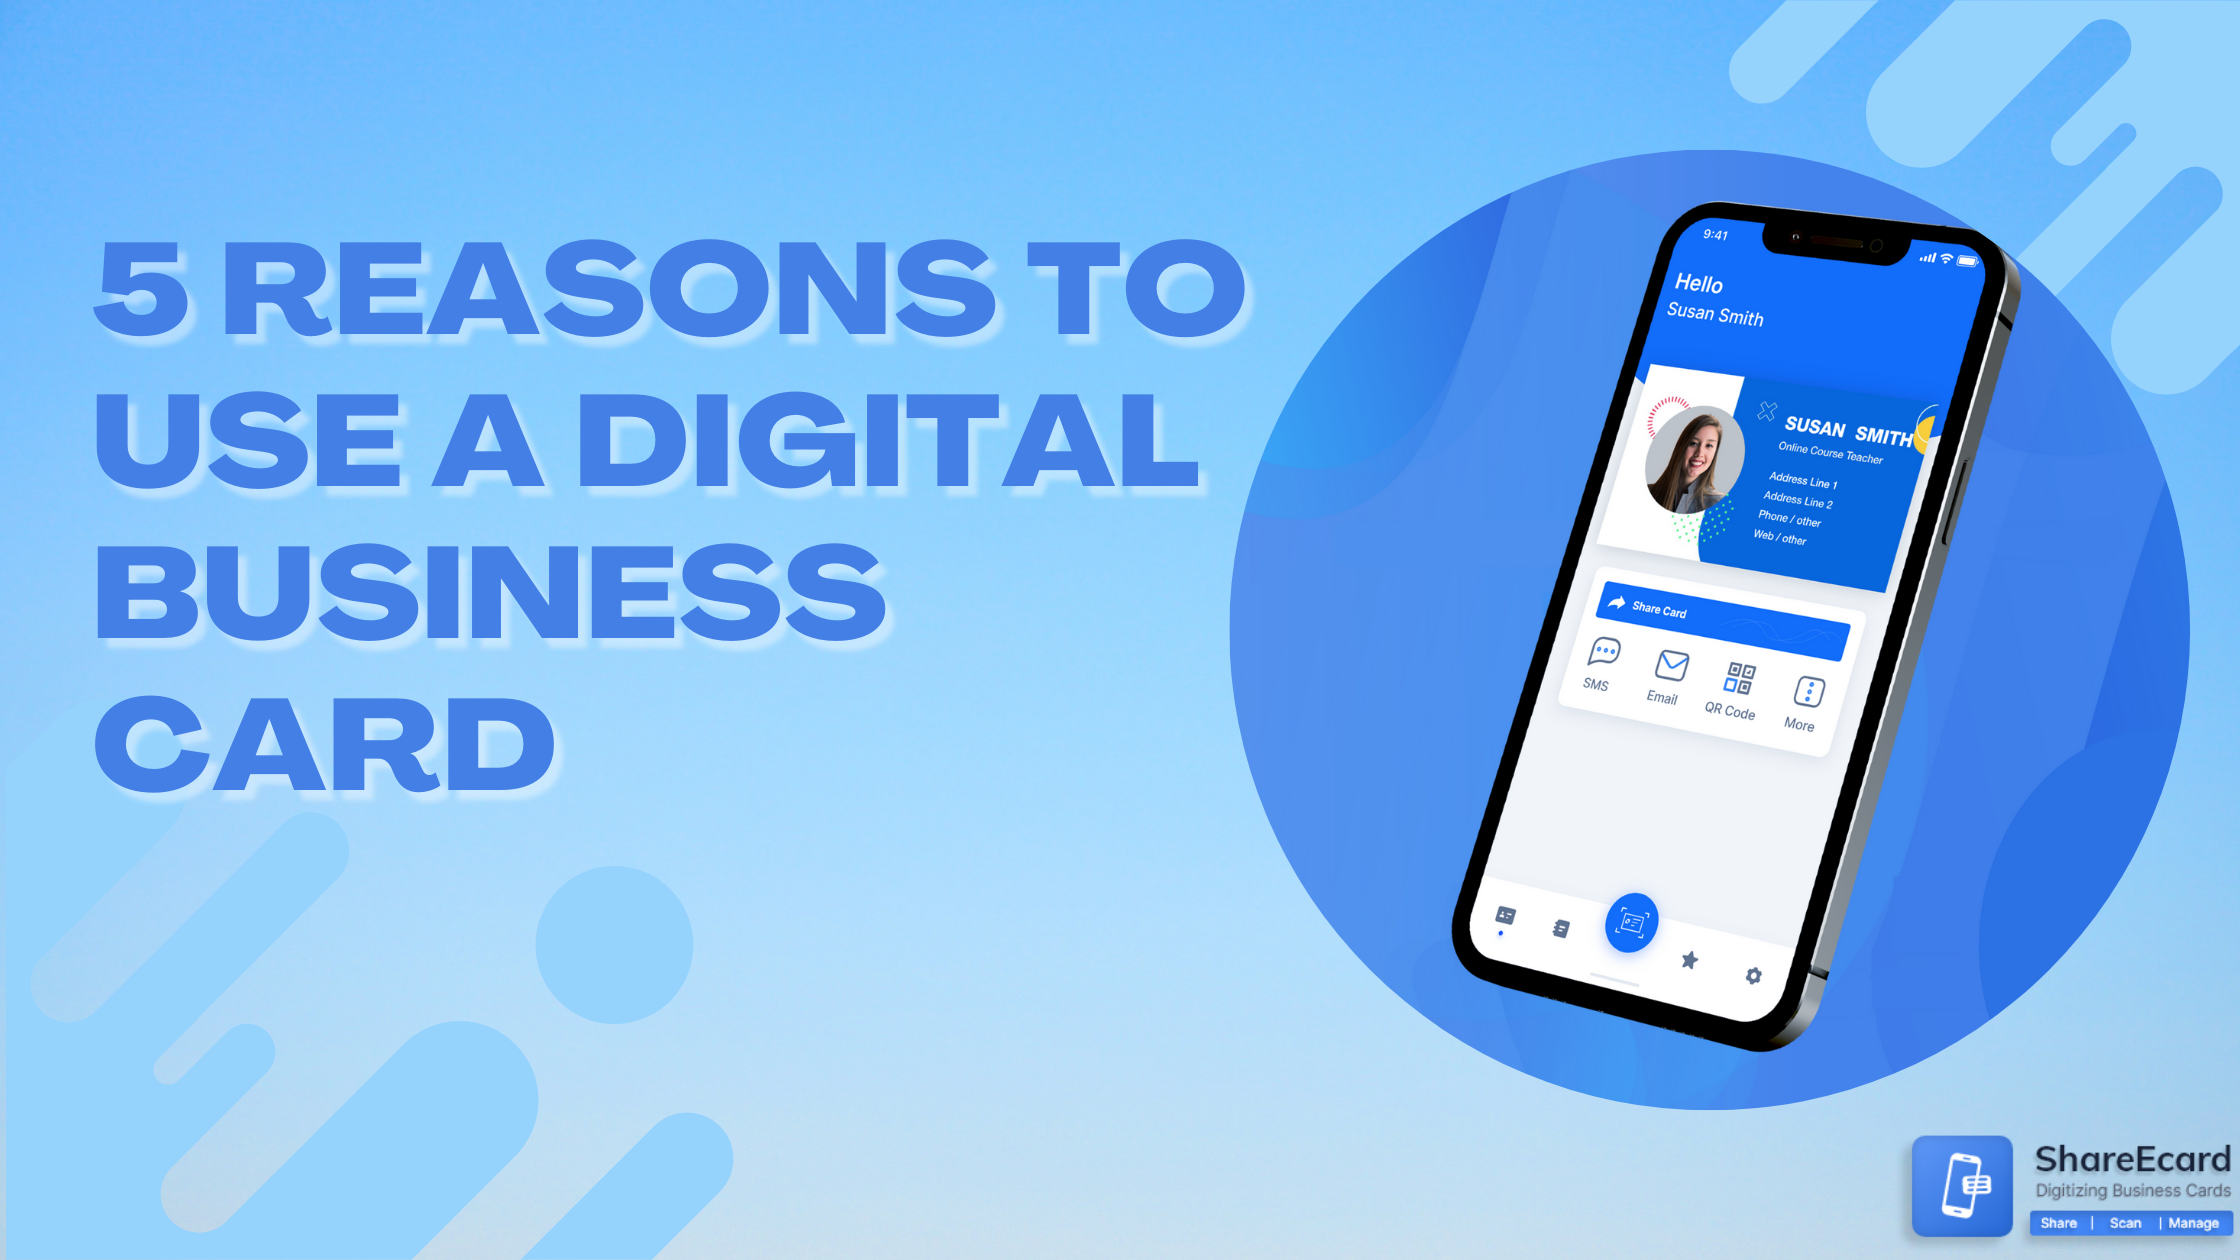 5 Reasons to Use a Digital Business Card